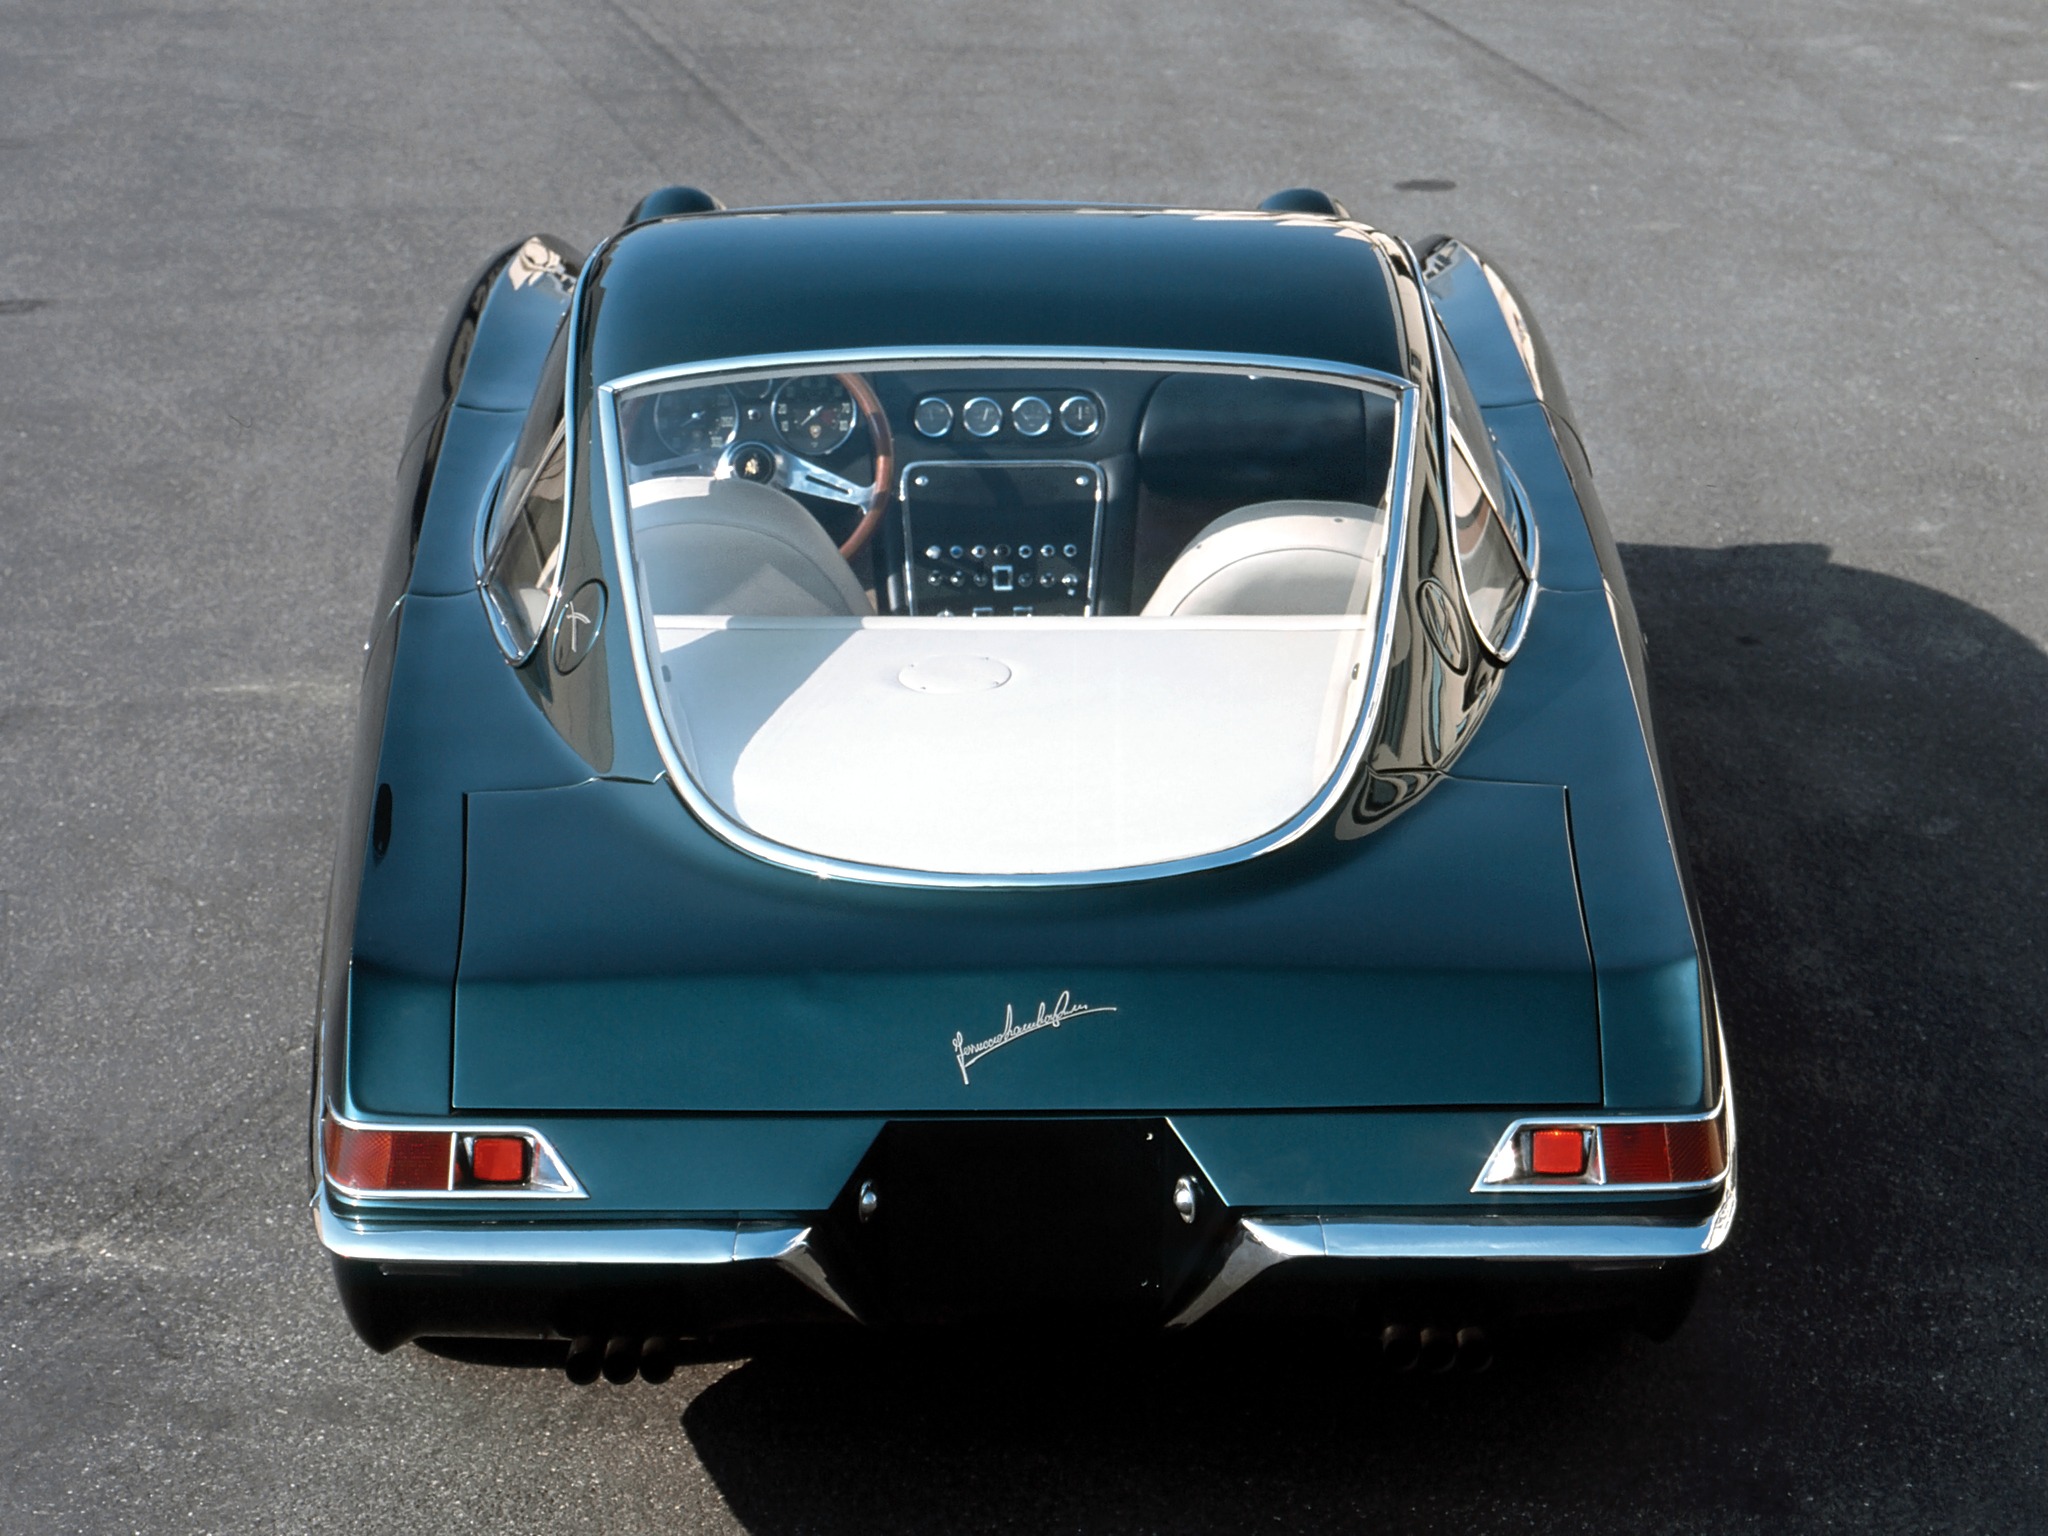 The Most Stunning Concept Cars of the 1960s - Old Concept Cars